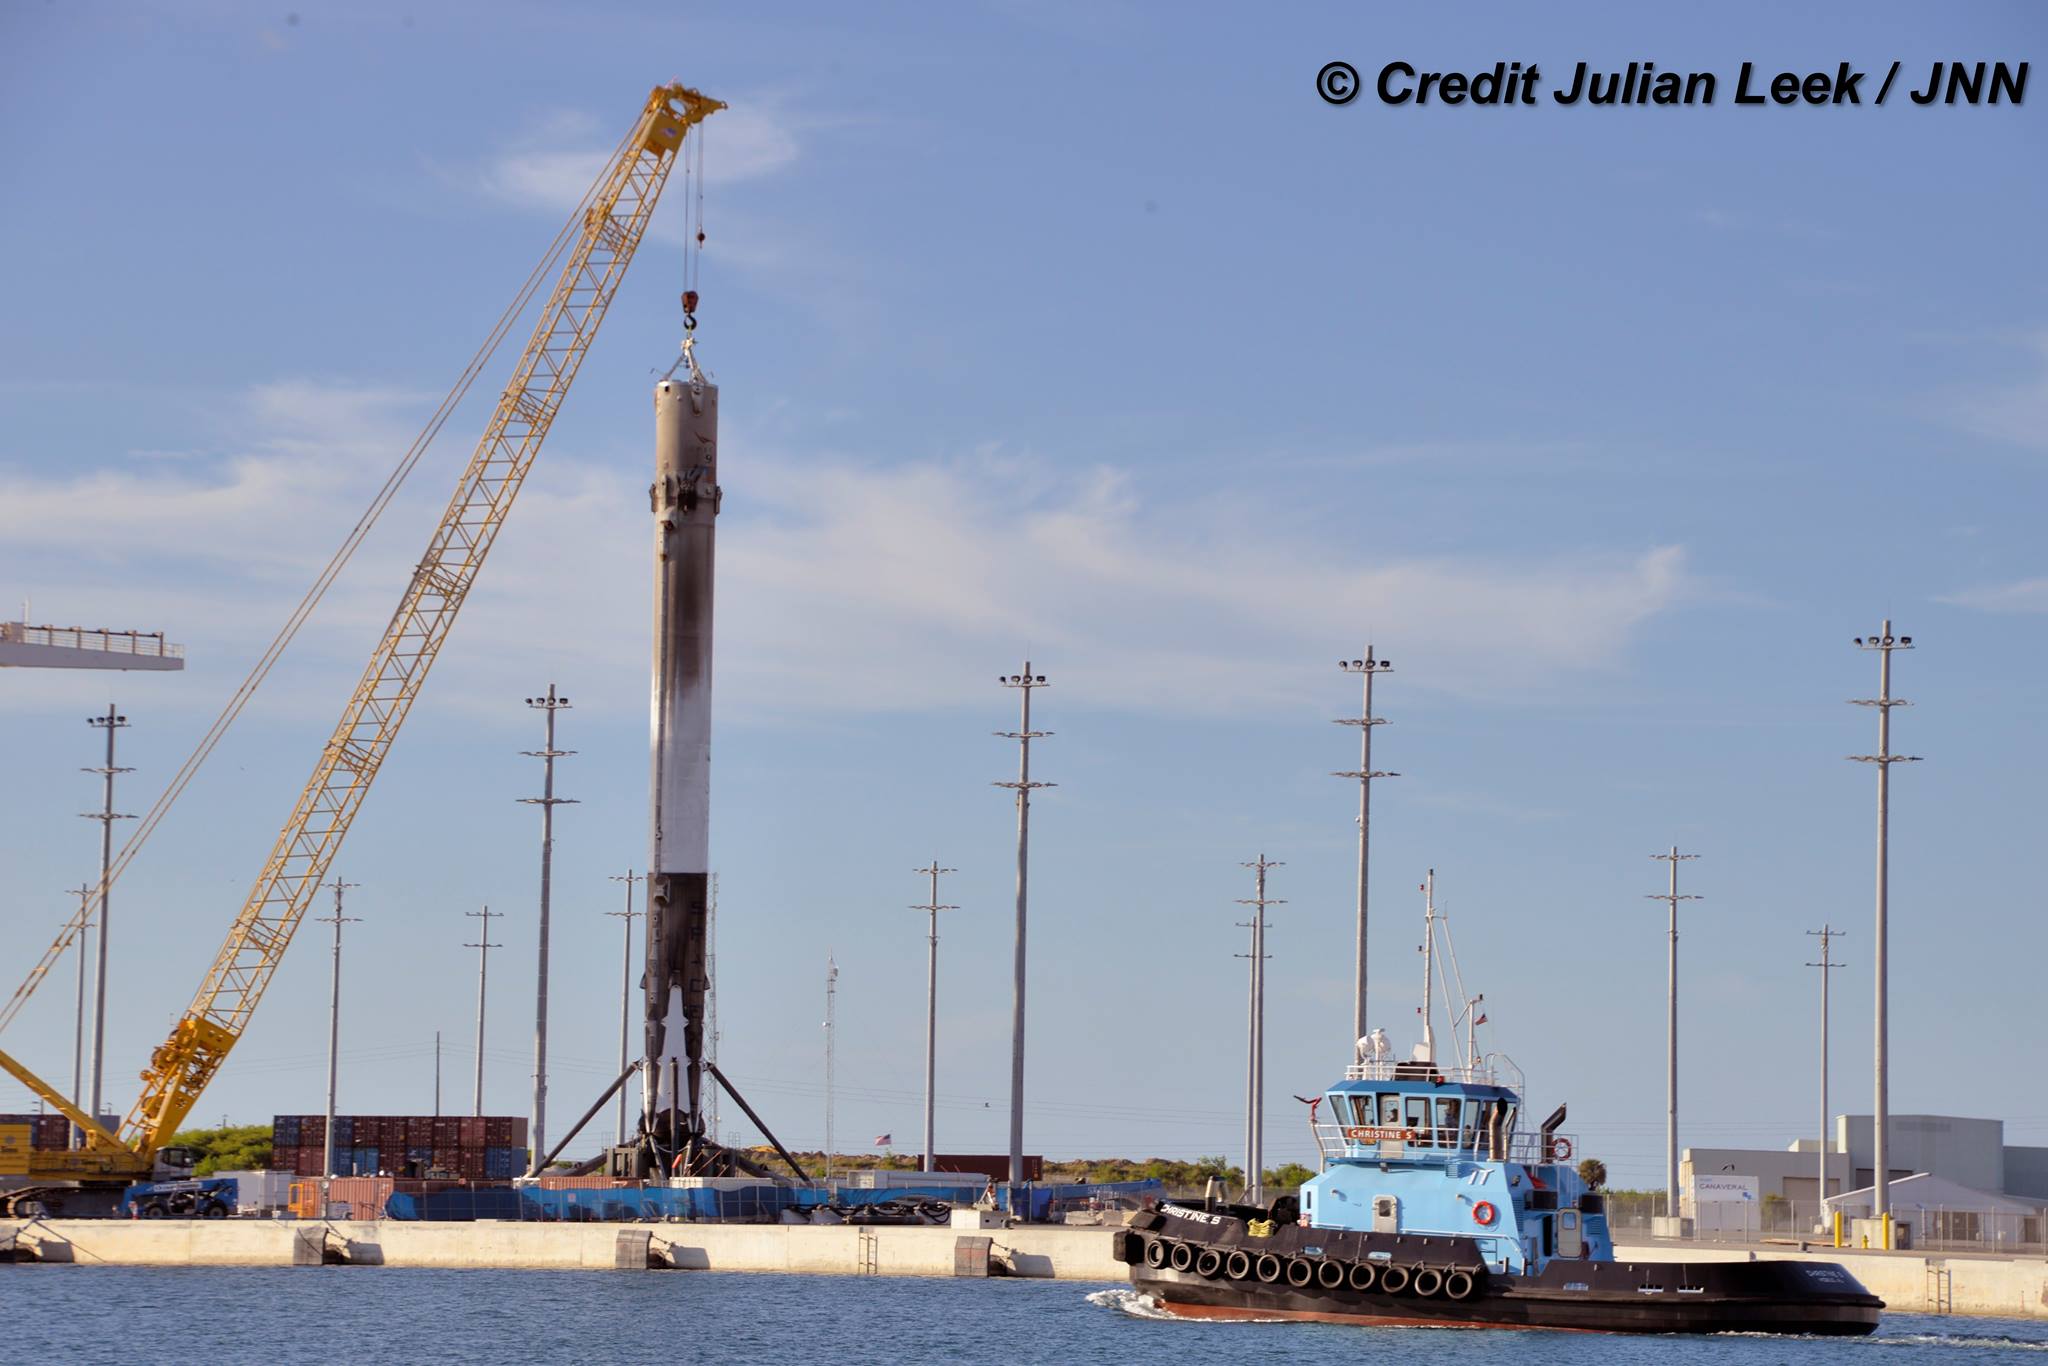 Recovered SpaceX Falcon 9 booster from JCSAT-16 launch after arrival in Port Canaveral, FL on Aug. 17, 2016 with landing legs deployed. Credit: Julian Leek